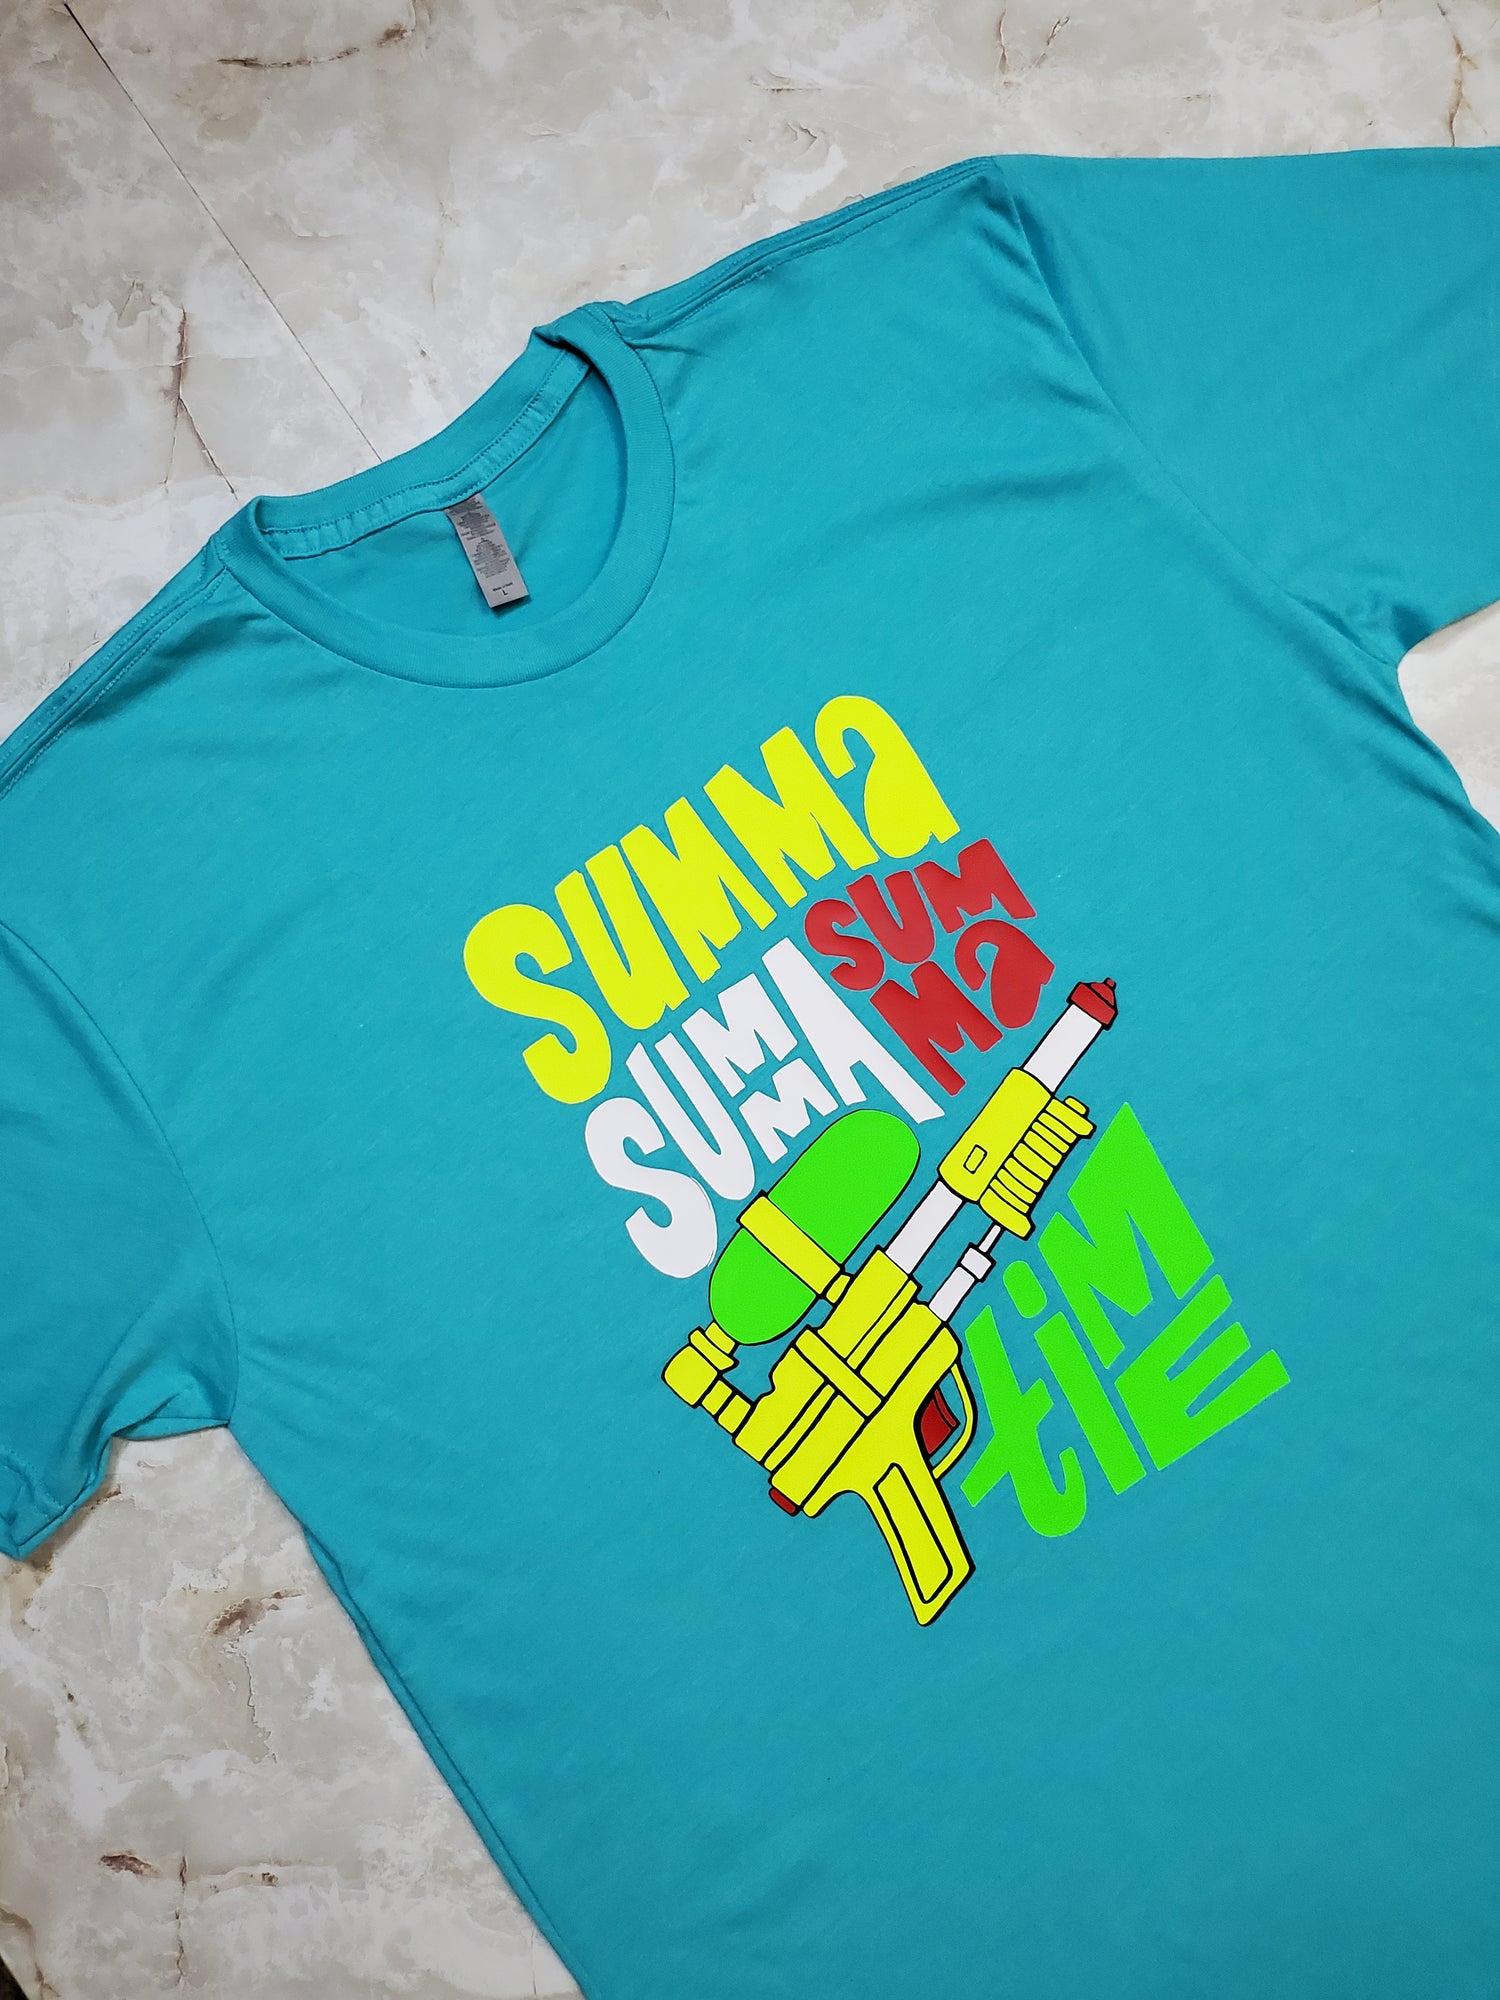 Summa Time T-Shirt (Day) - Centre Ave Clothing Co.